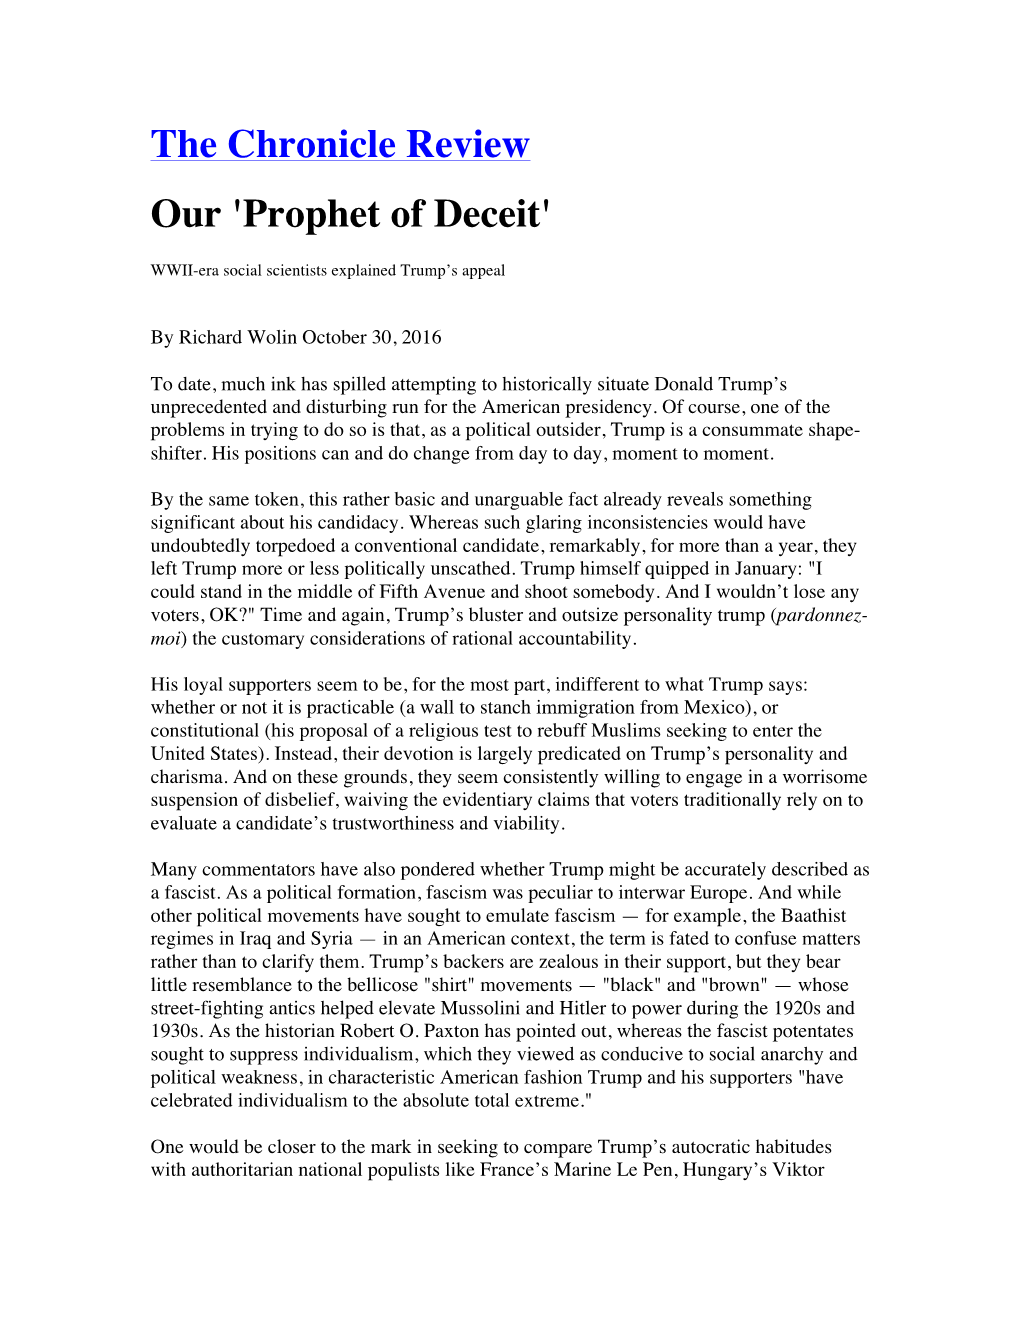 The Chronicle Review Our 'Prophet of Deceit'